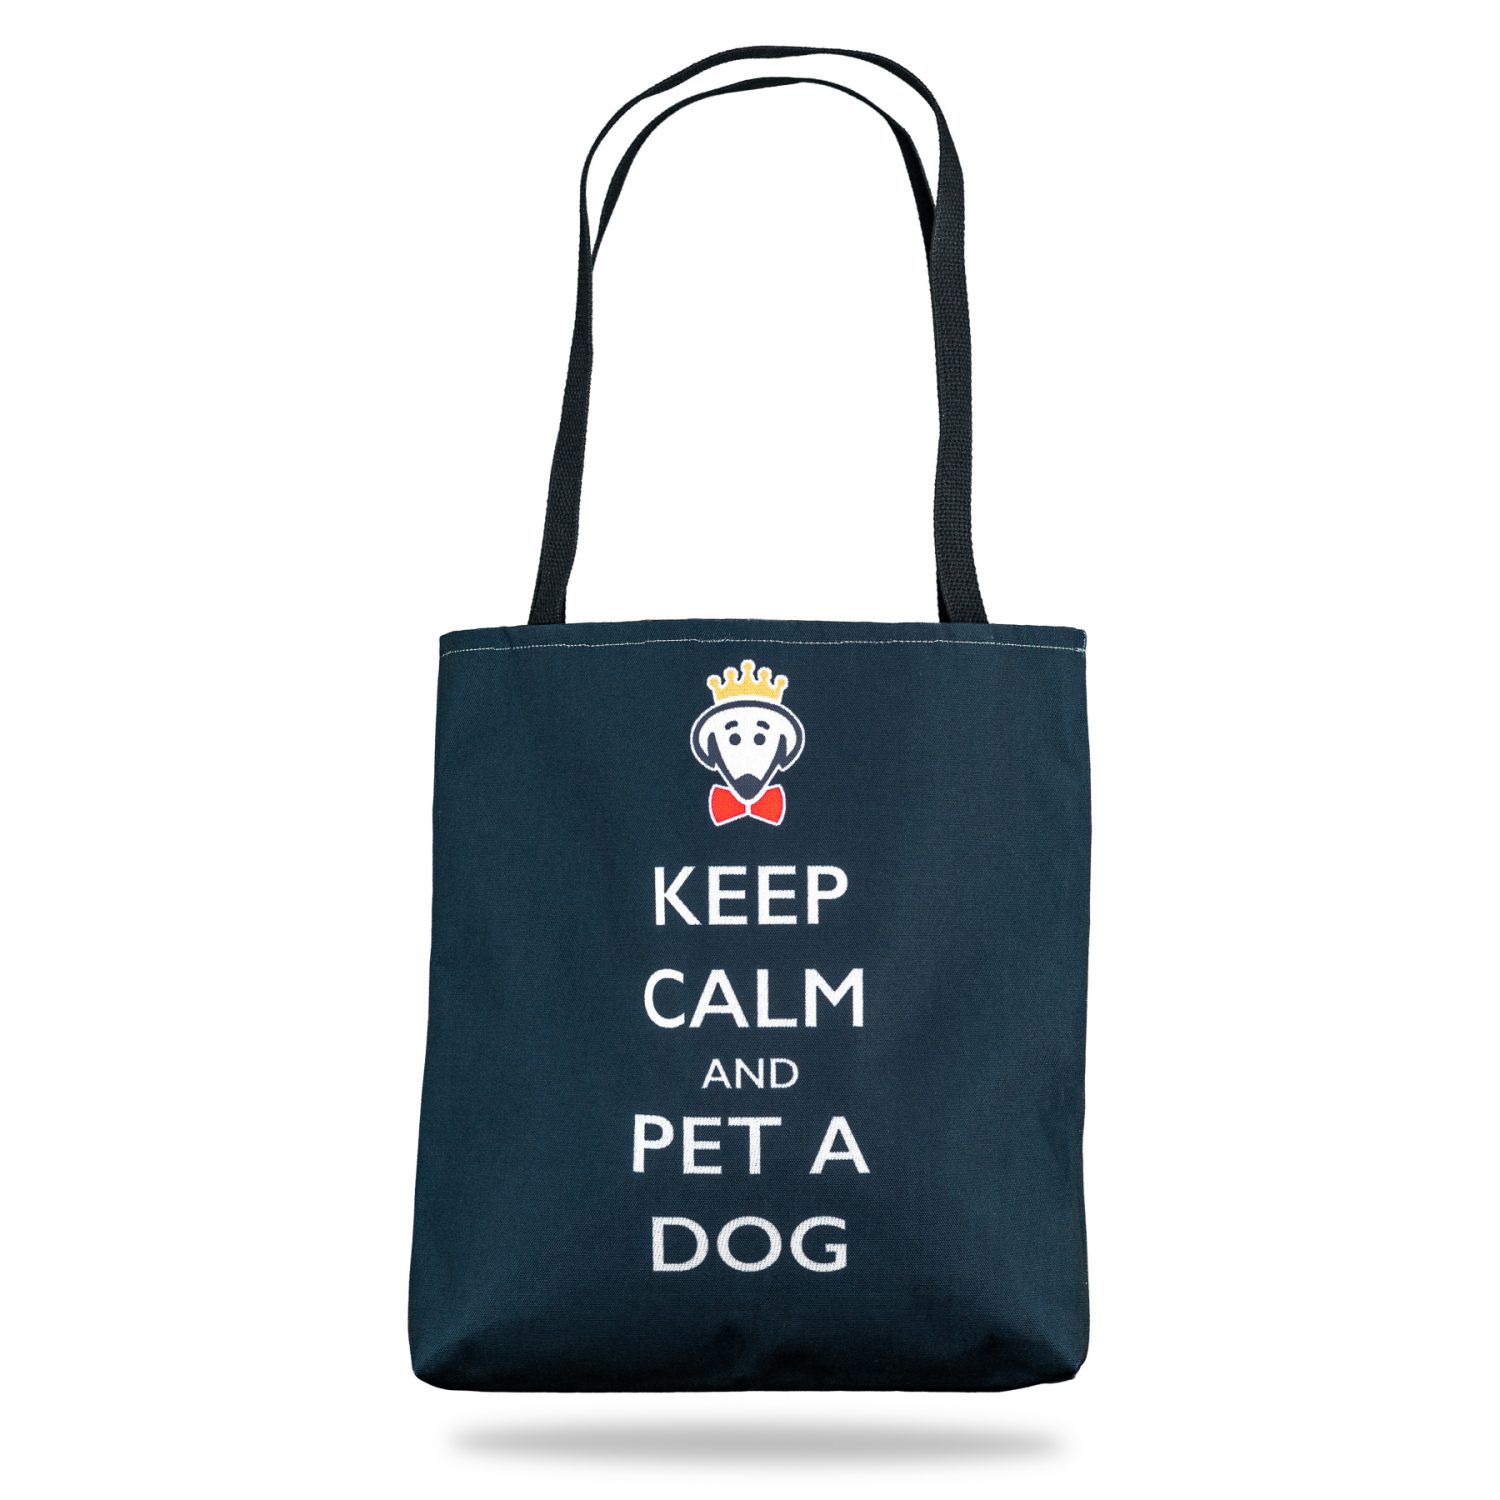 Beau Tyler - Keep Calm and Pet A Dog black tote bag front